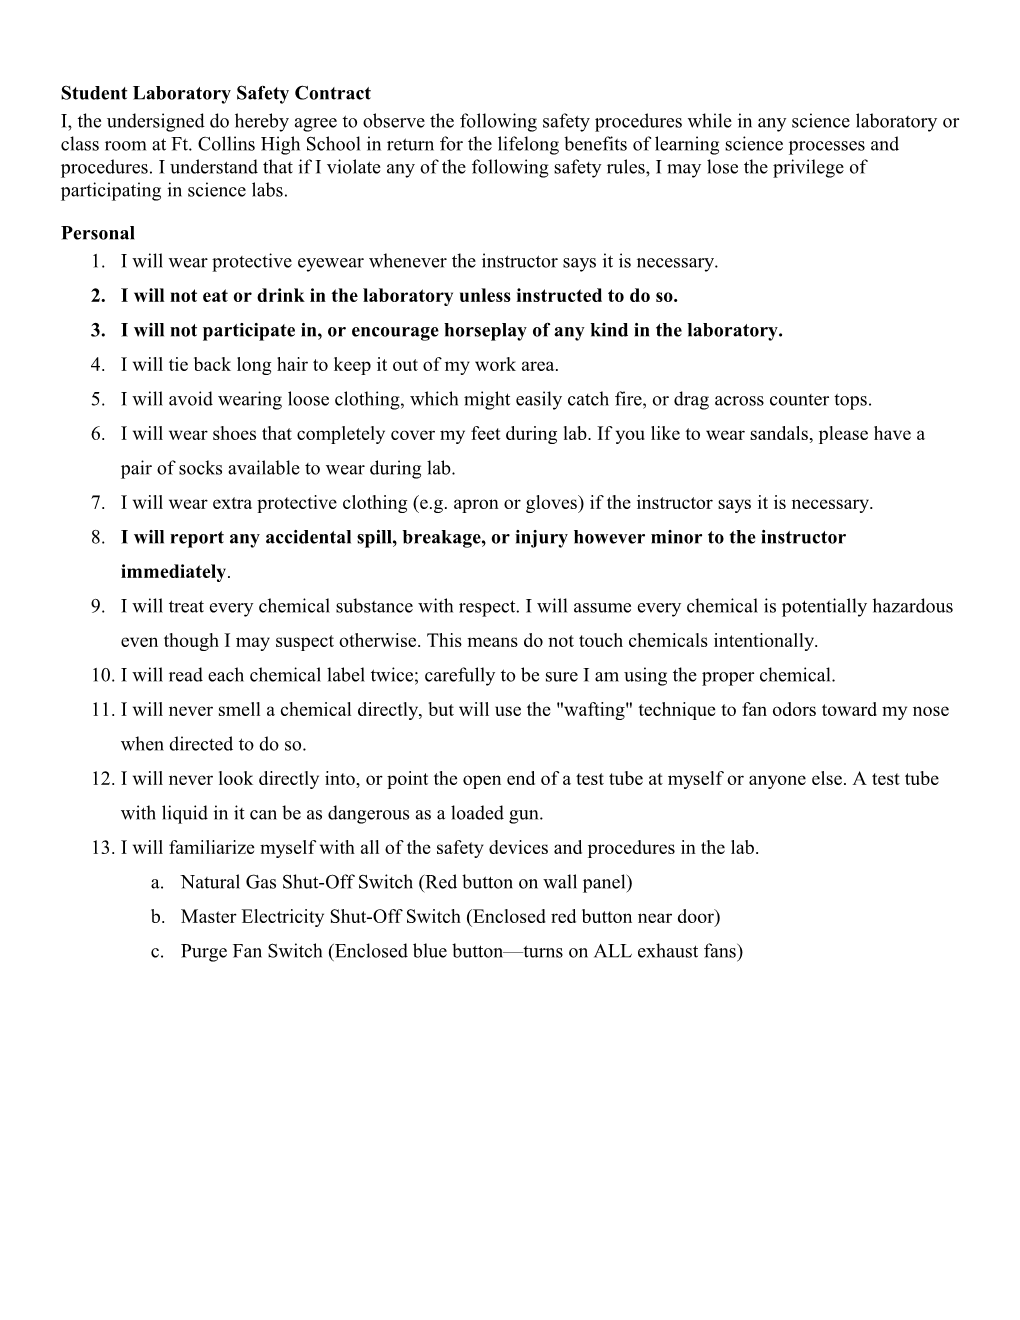 Student Laboratory Safety Contract s1